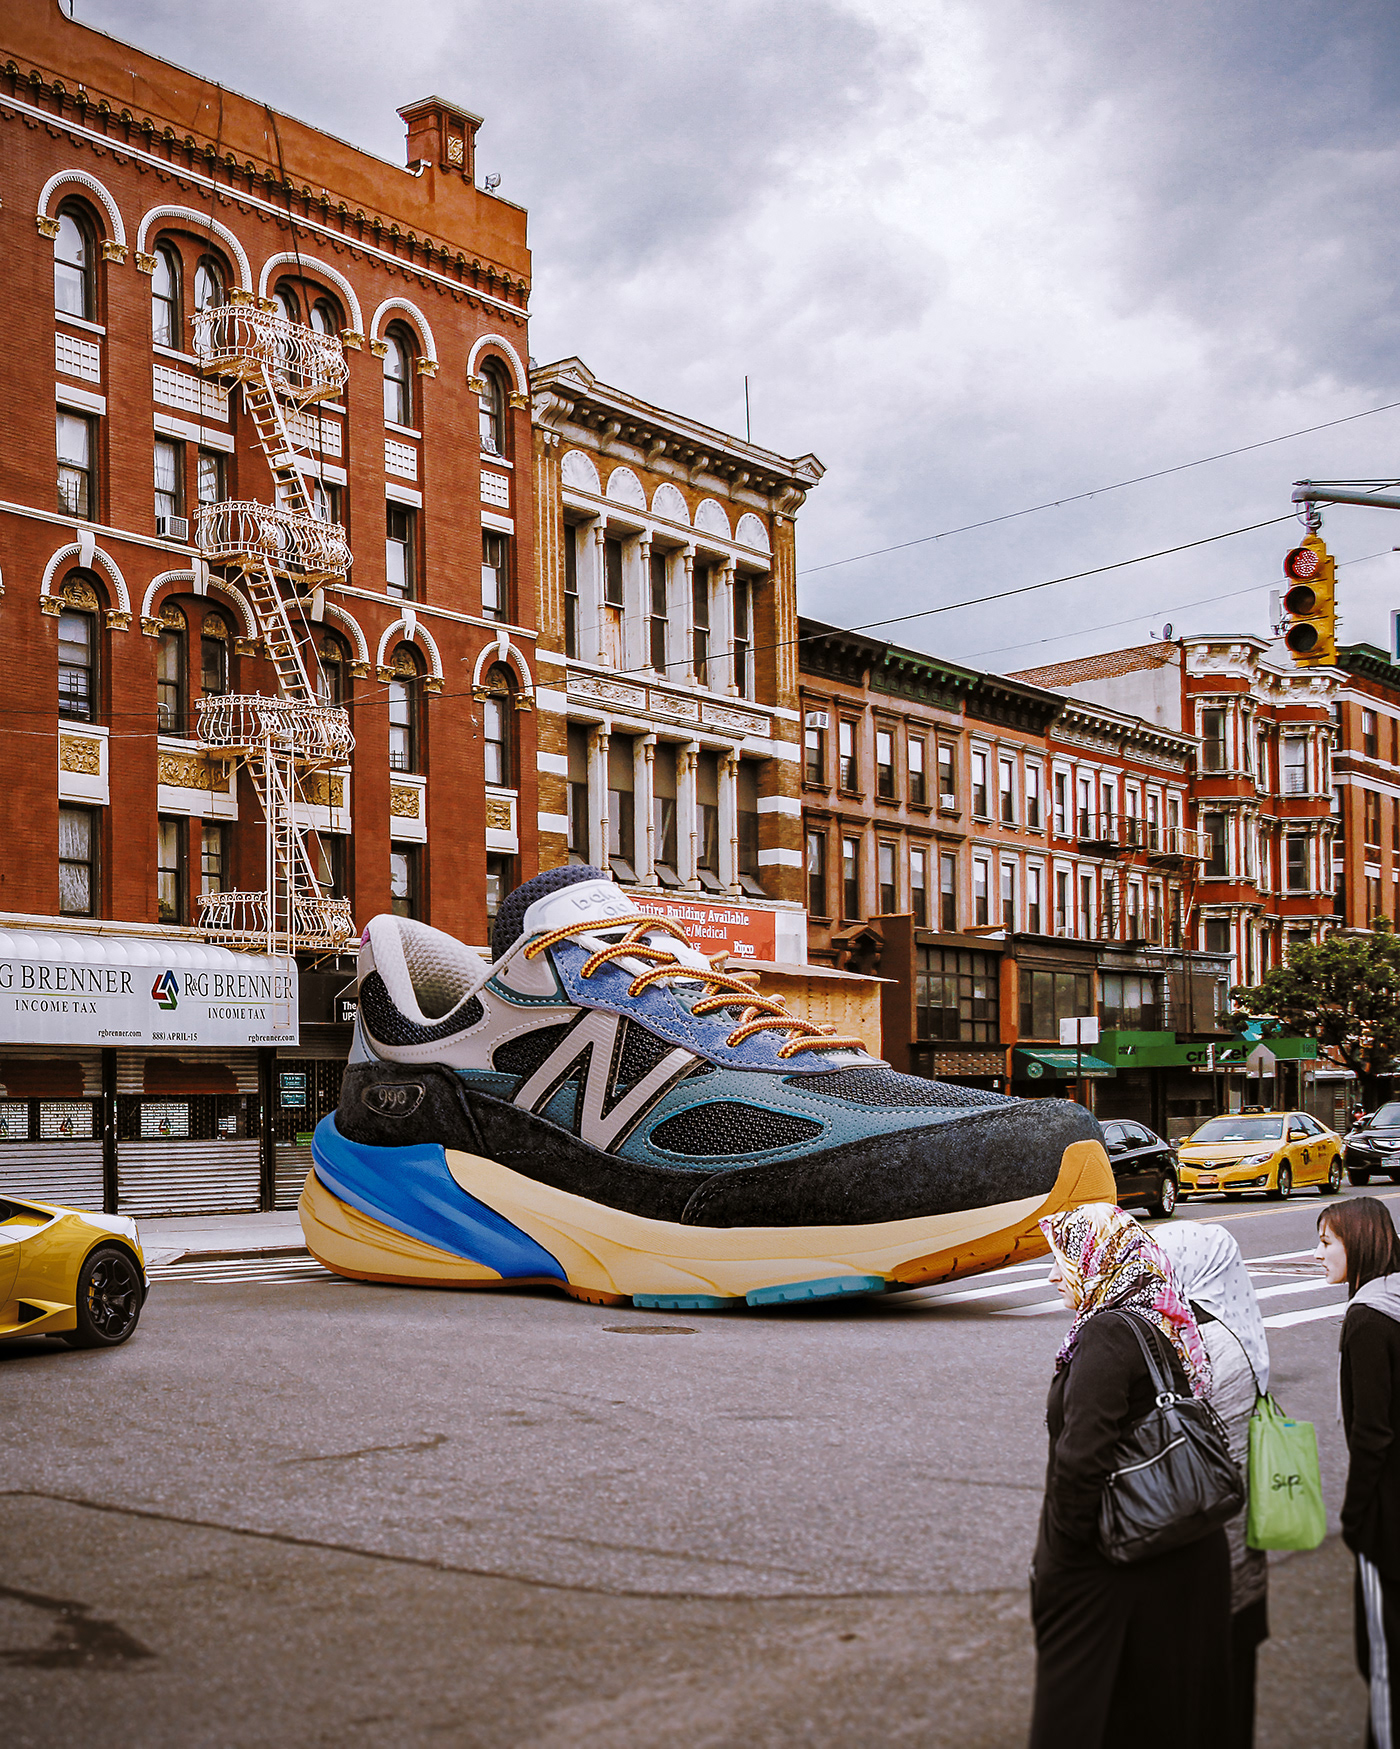 
Giant sneaker photo composite on the street . Retouching using Photoshop